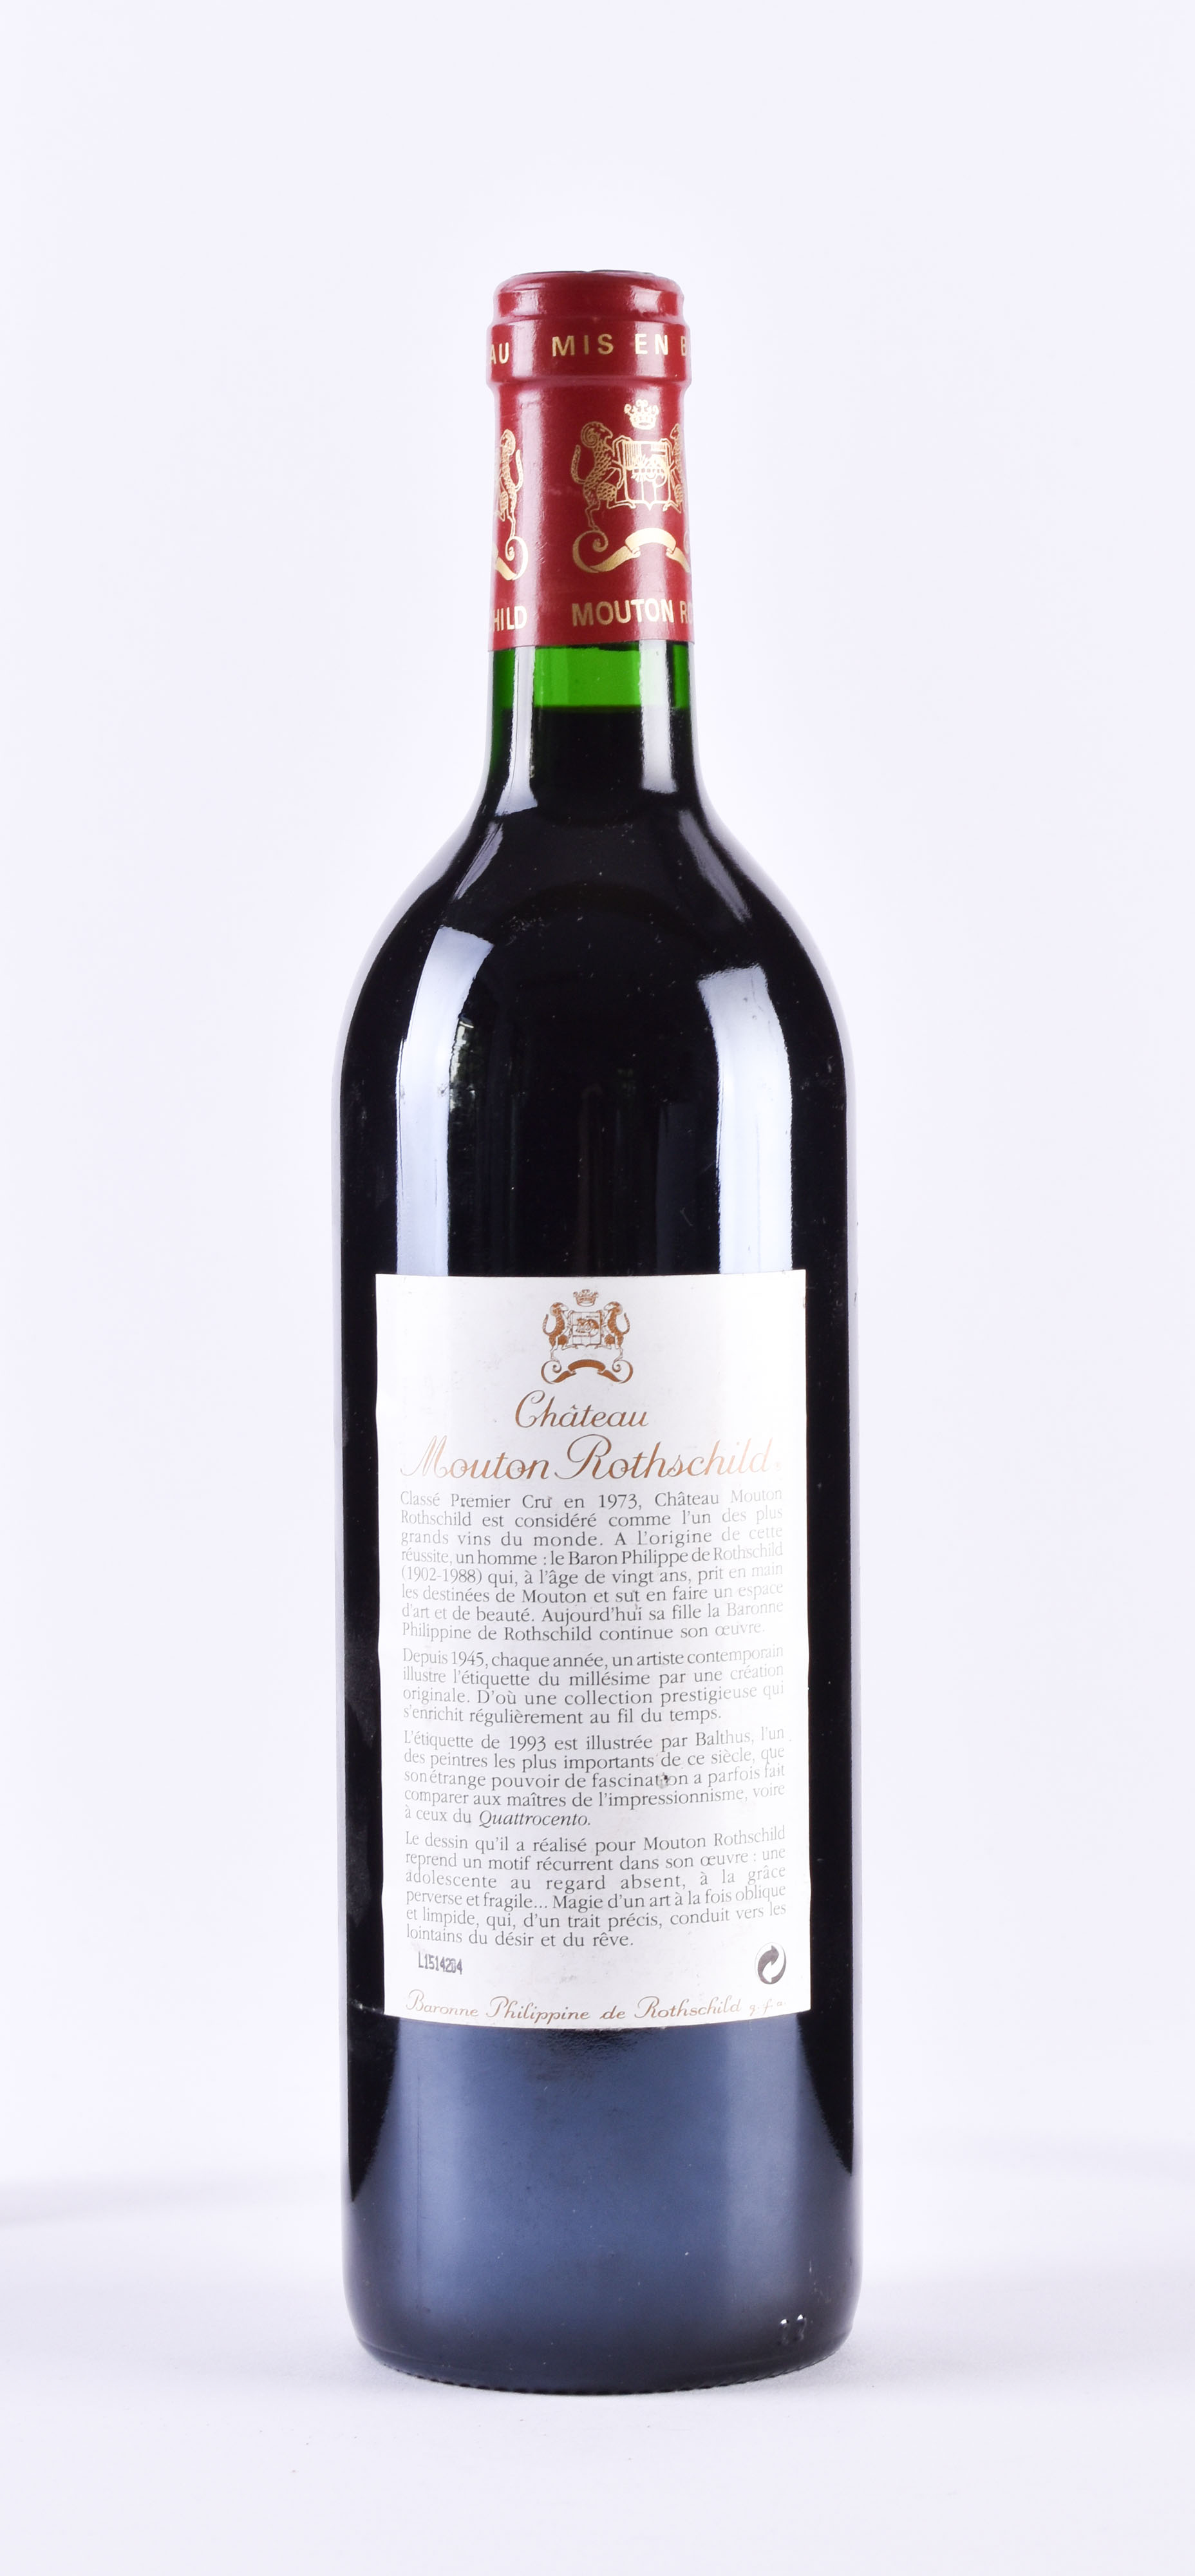 Chateau Mouton Rothschild 1993 - Image 2 of 2